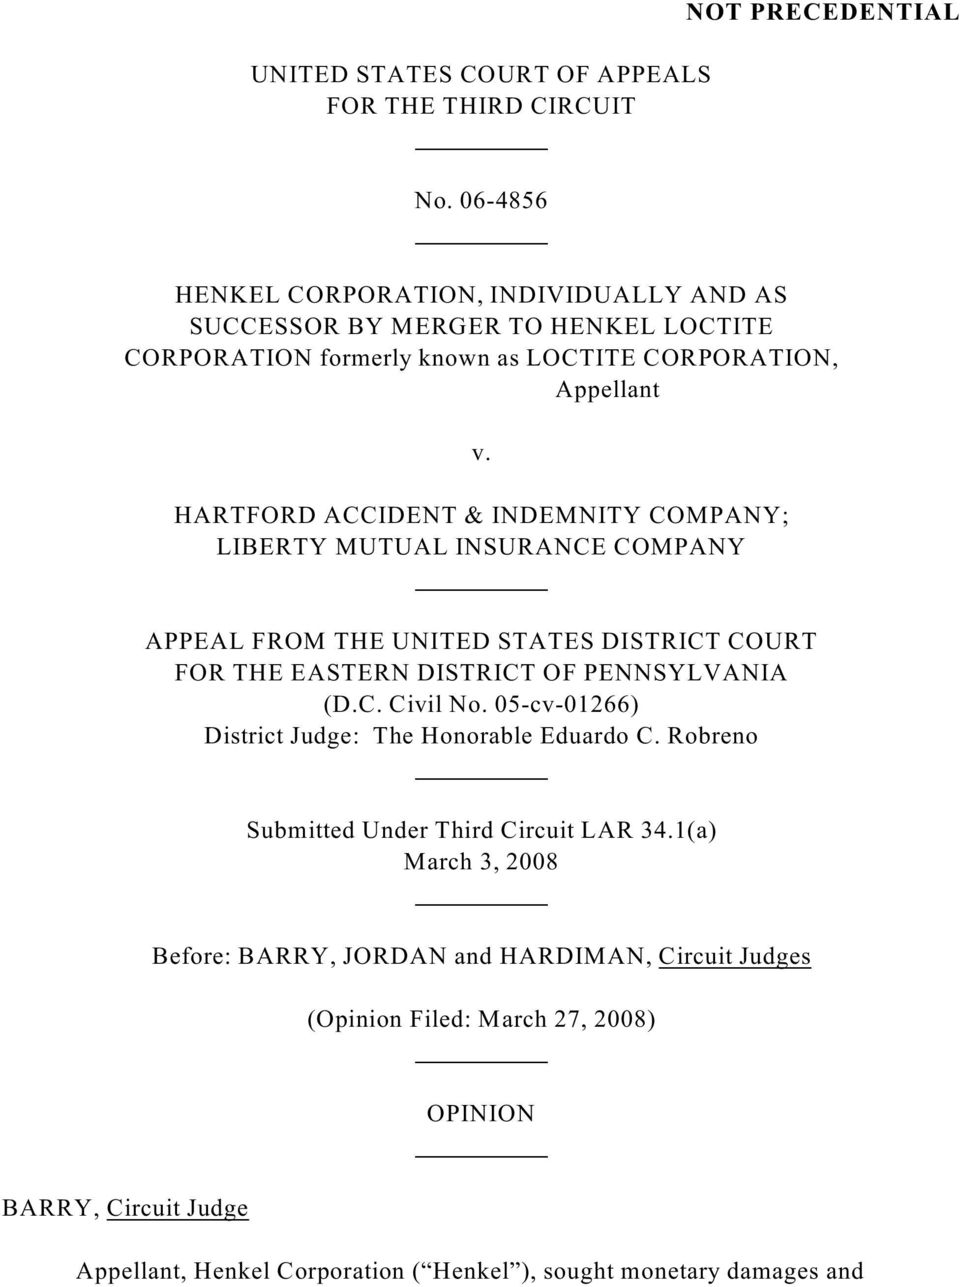 HARTFORD ACCIDENT & INDEMNITY COMPANY; LIBERTY MUTUAL INSURANCE COMPANY APPEAL FROM THE UNITED STATES DISTRICT COURT FOR THE EASTERN DISTRICT OF PENNSYLVANIA (D.C. Civil No.